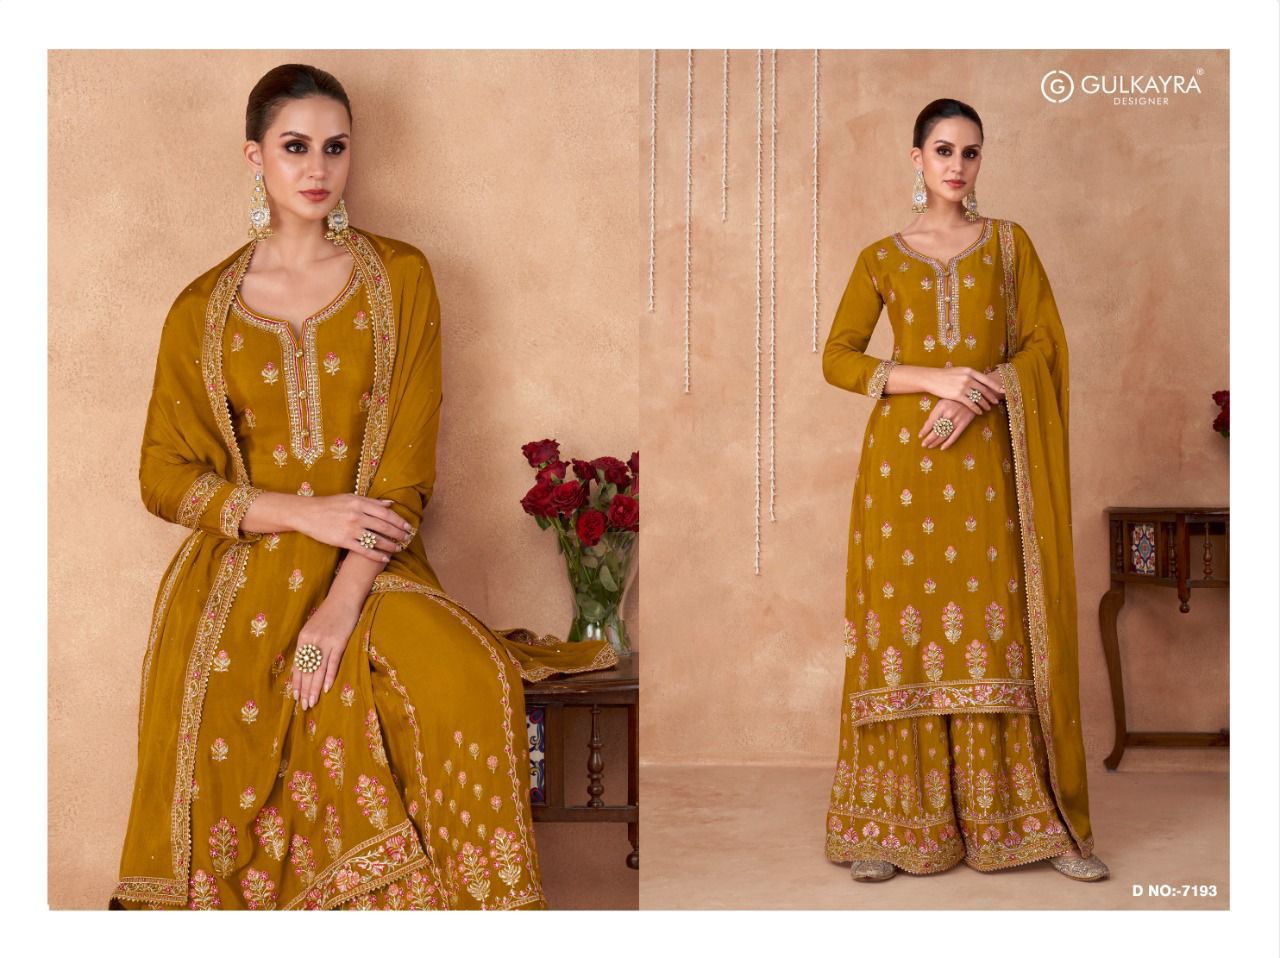 Gulkayra Designer Izhaar 7190 Series Suit Anant Tex Exports Private Limited